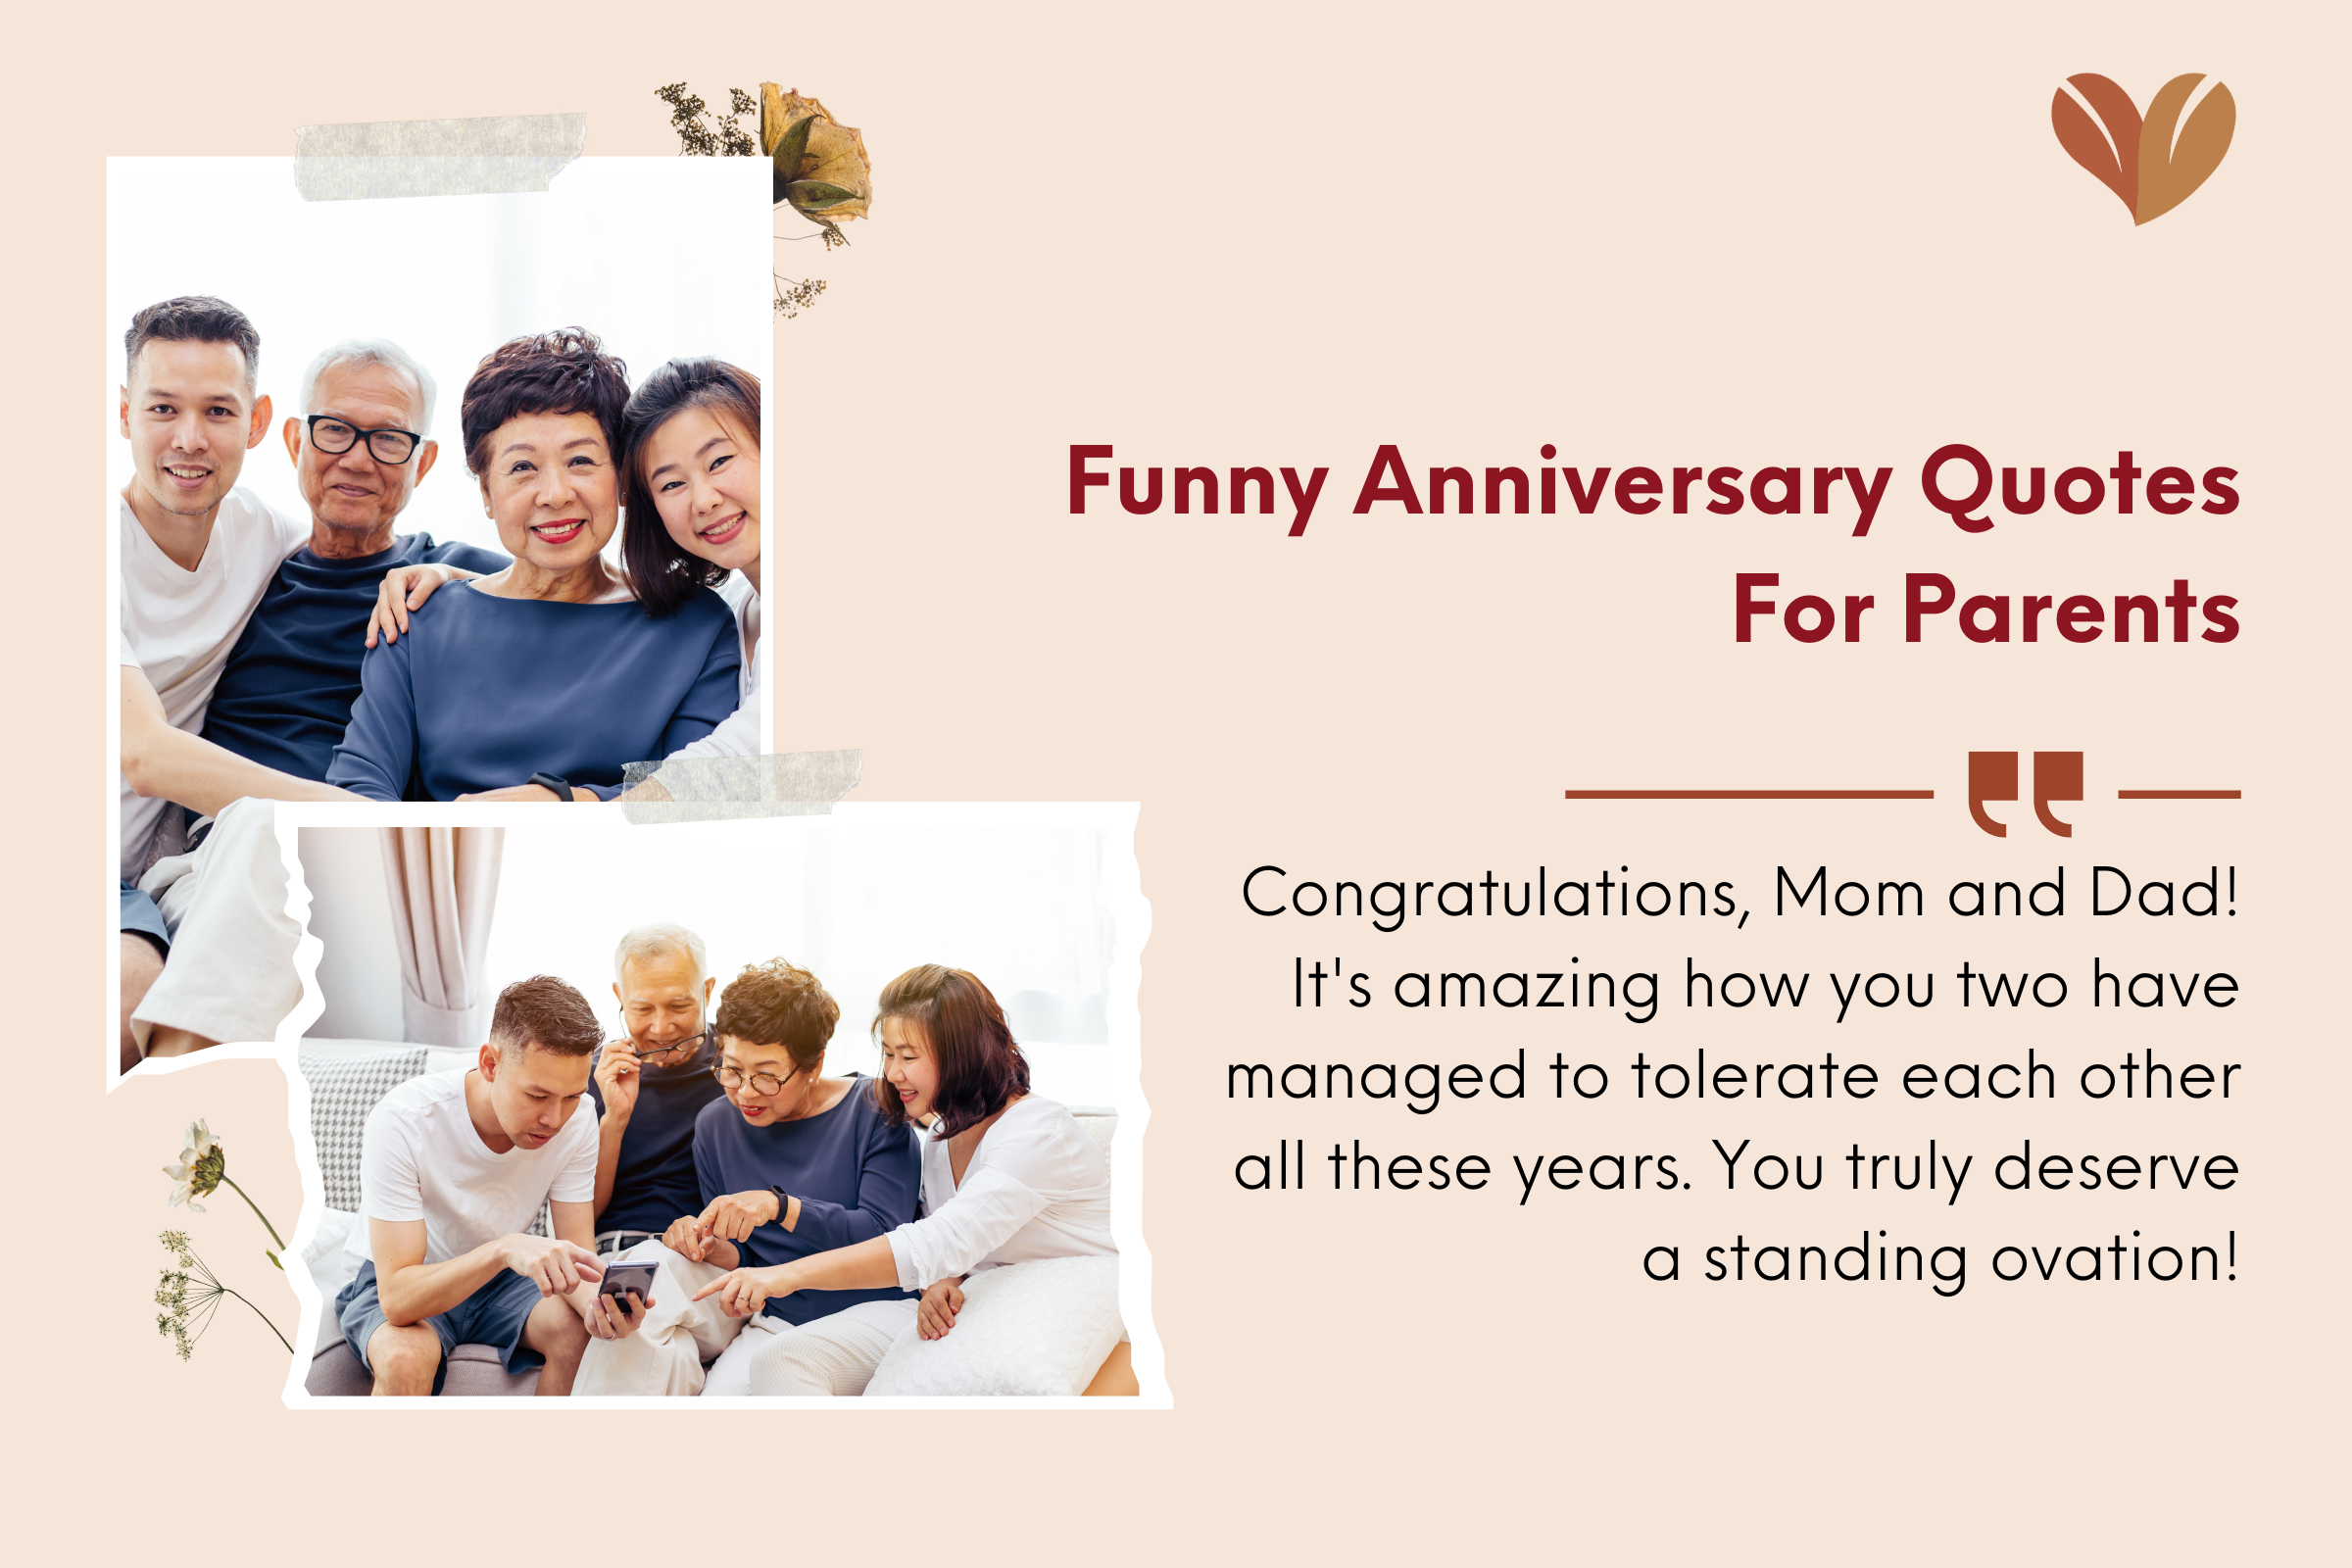 Sending our parents cards with funny anniversary quotes